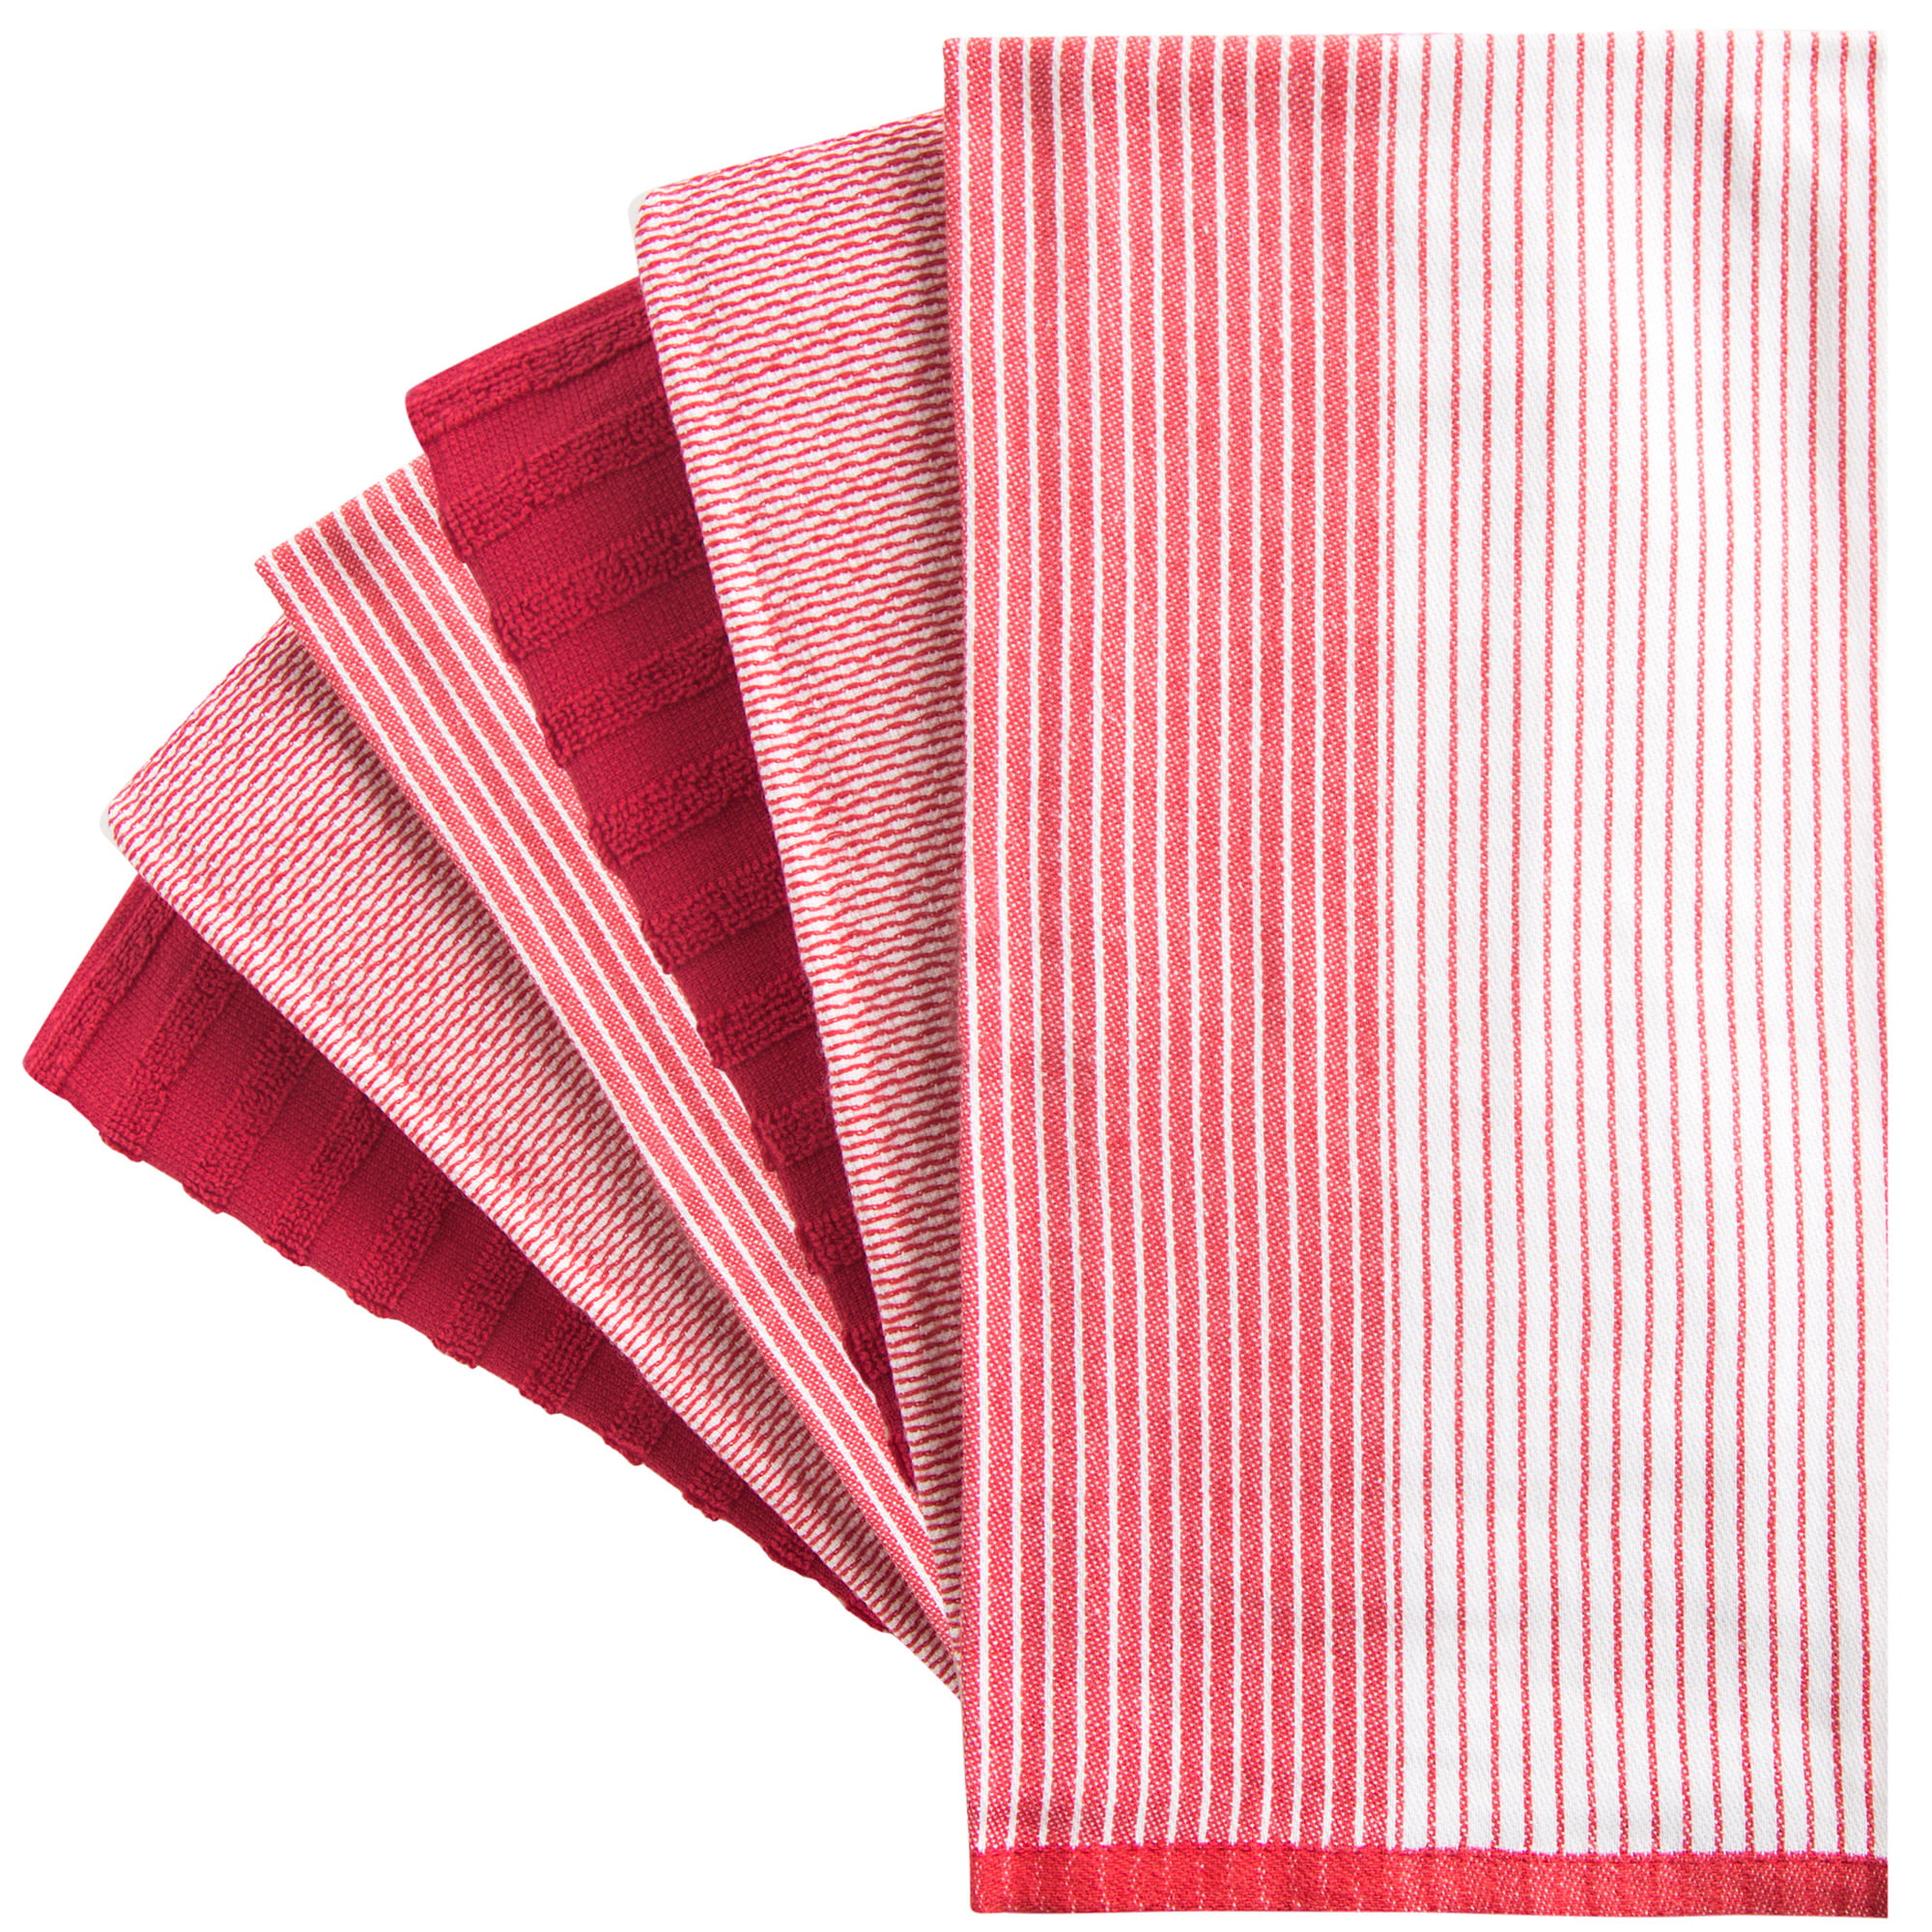 Cotton Clinic Assorted Kitchen Towels 5 Pack – Soft Absorbent Quick Drying  Table & Kitchen Linen - Dish Towels, Dish Cloths, Tea Towels and Cleaning